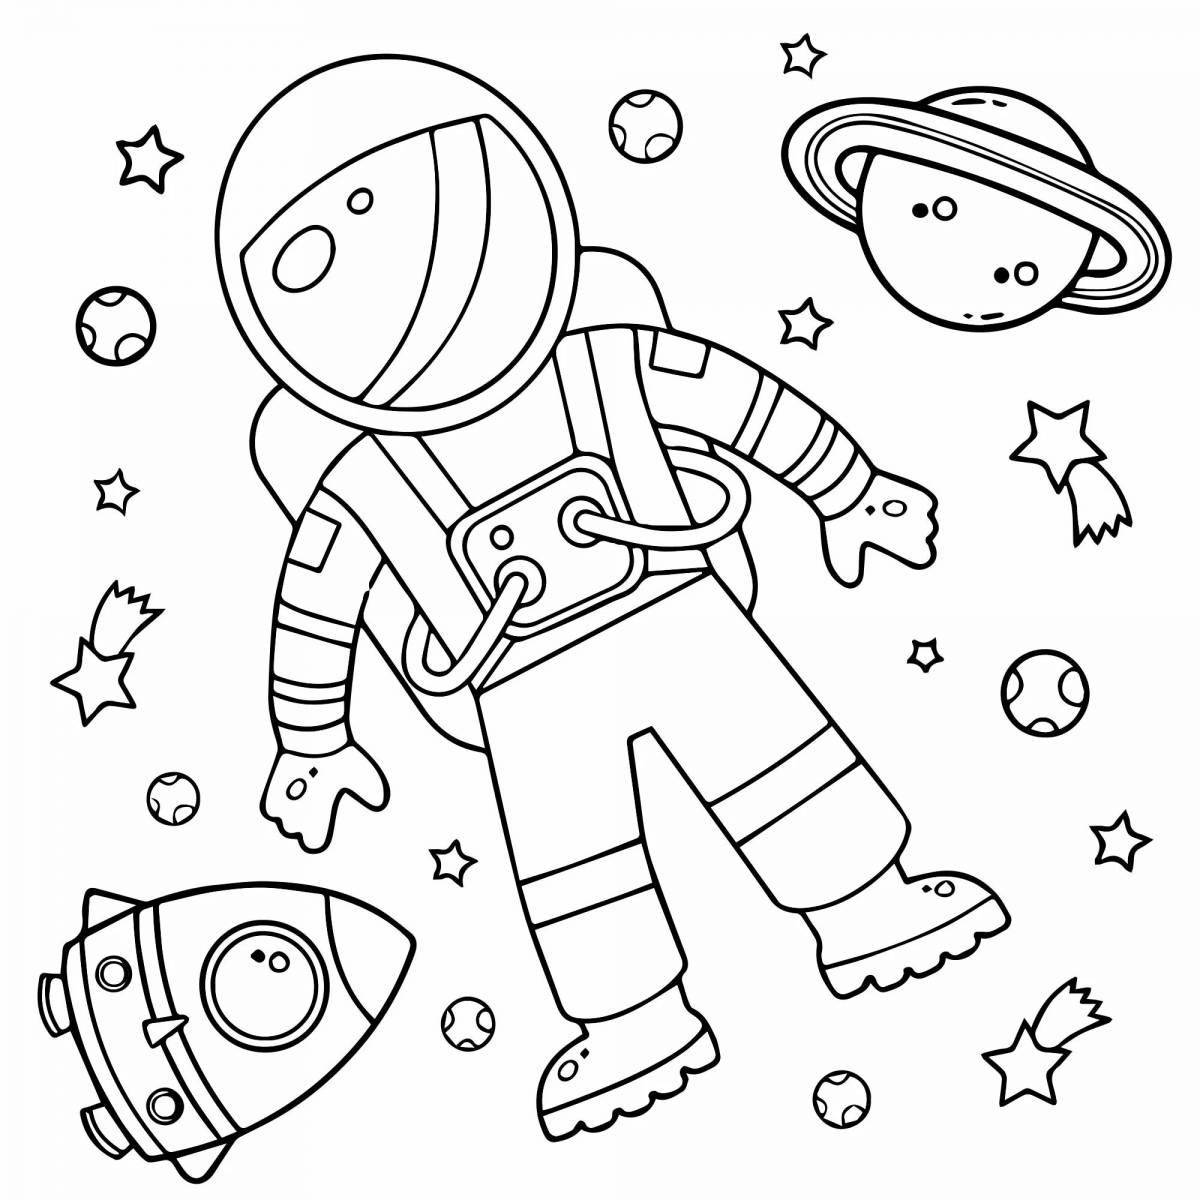 Coloring page glowing astronaut on the space station